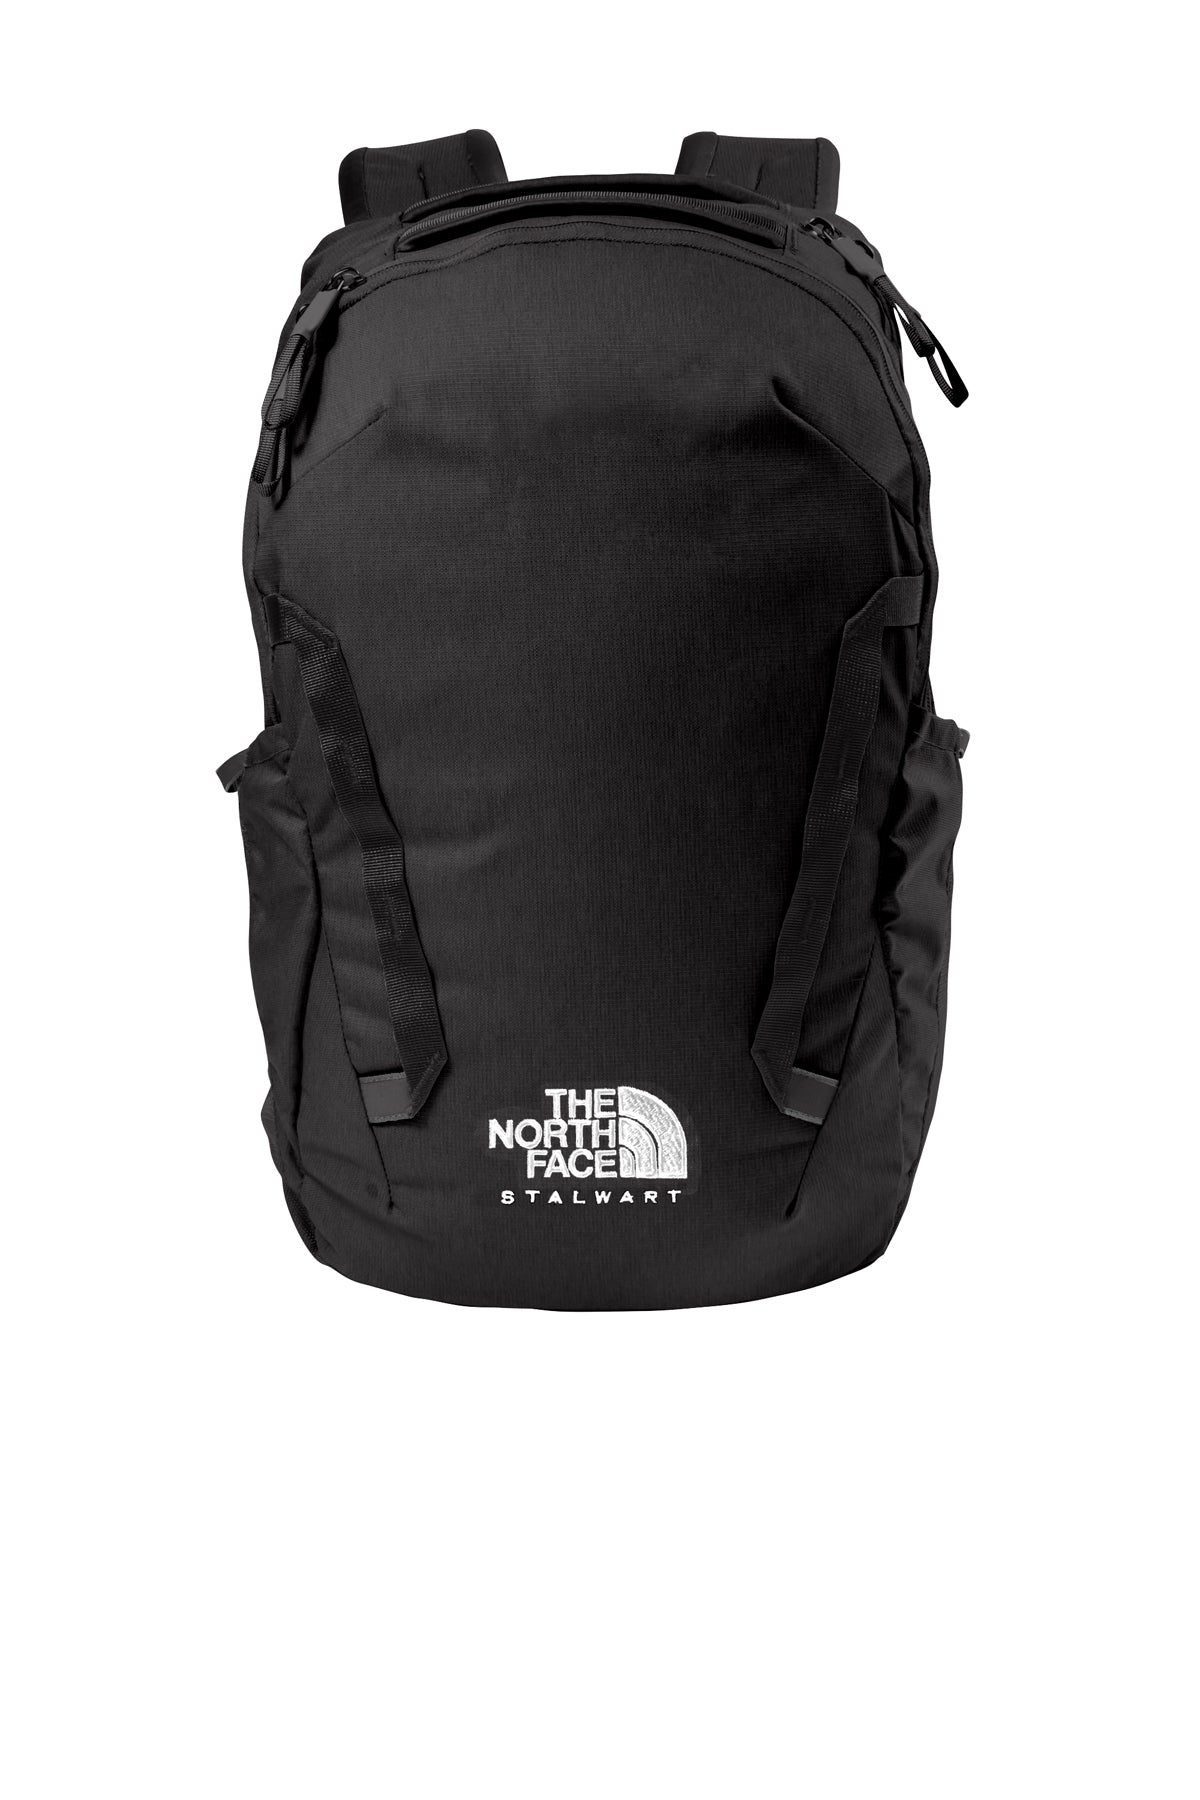 The North Face Stalwart Backpack-8